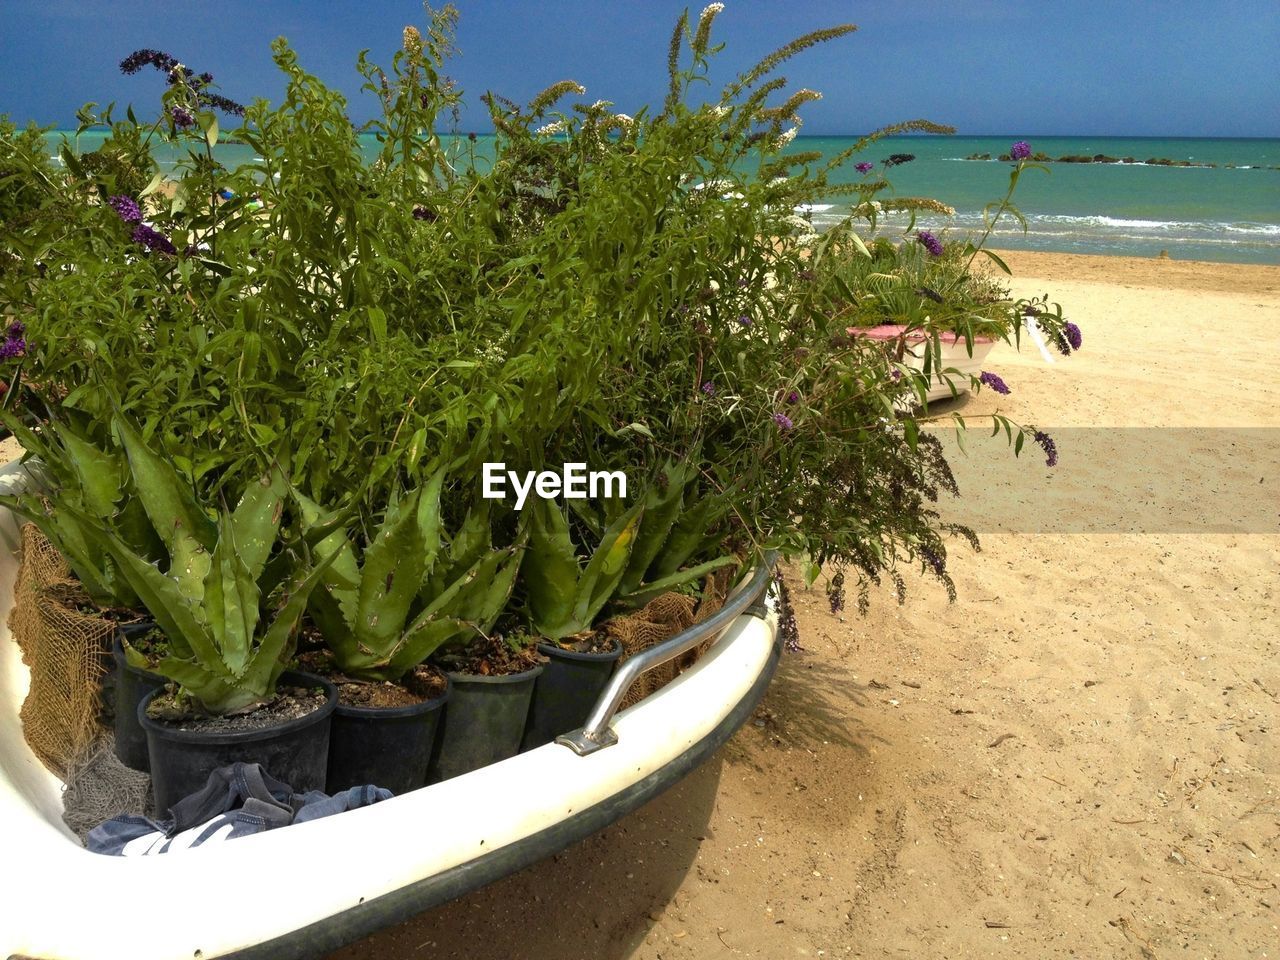 Potted plants in abandoned boat on sand at beach